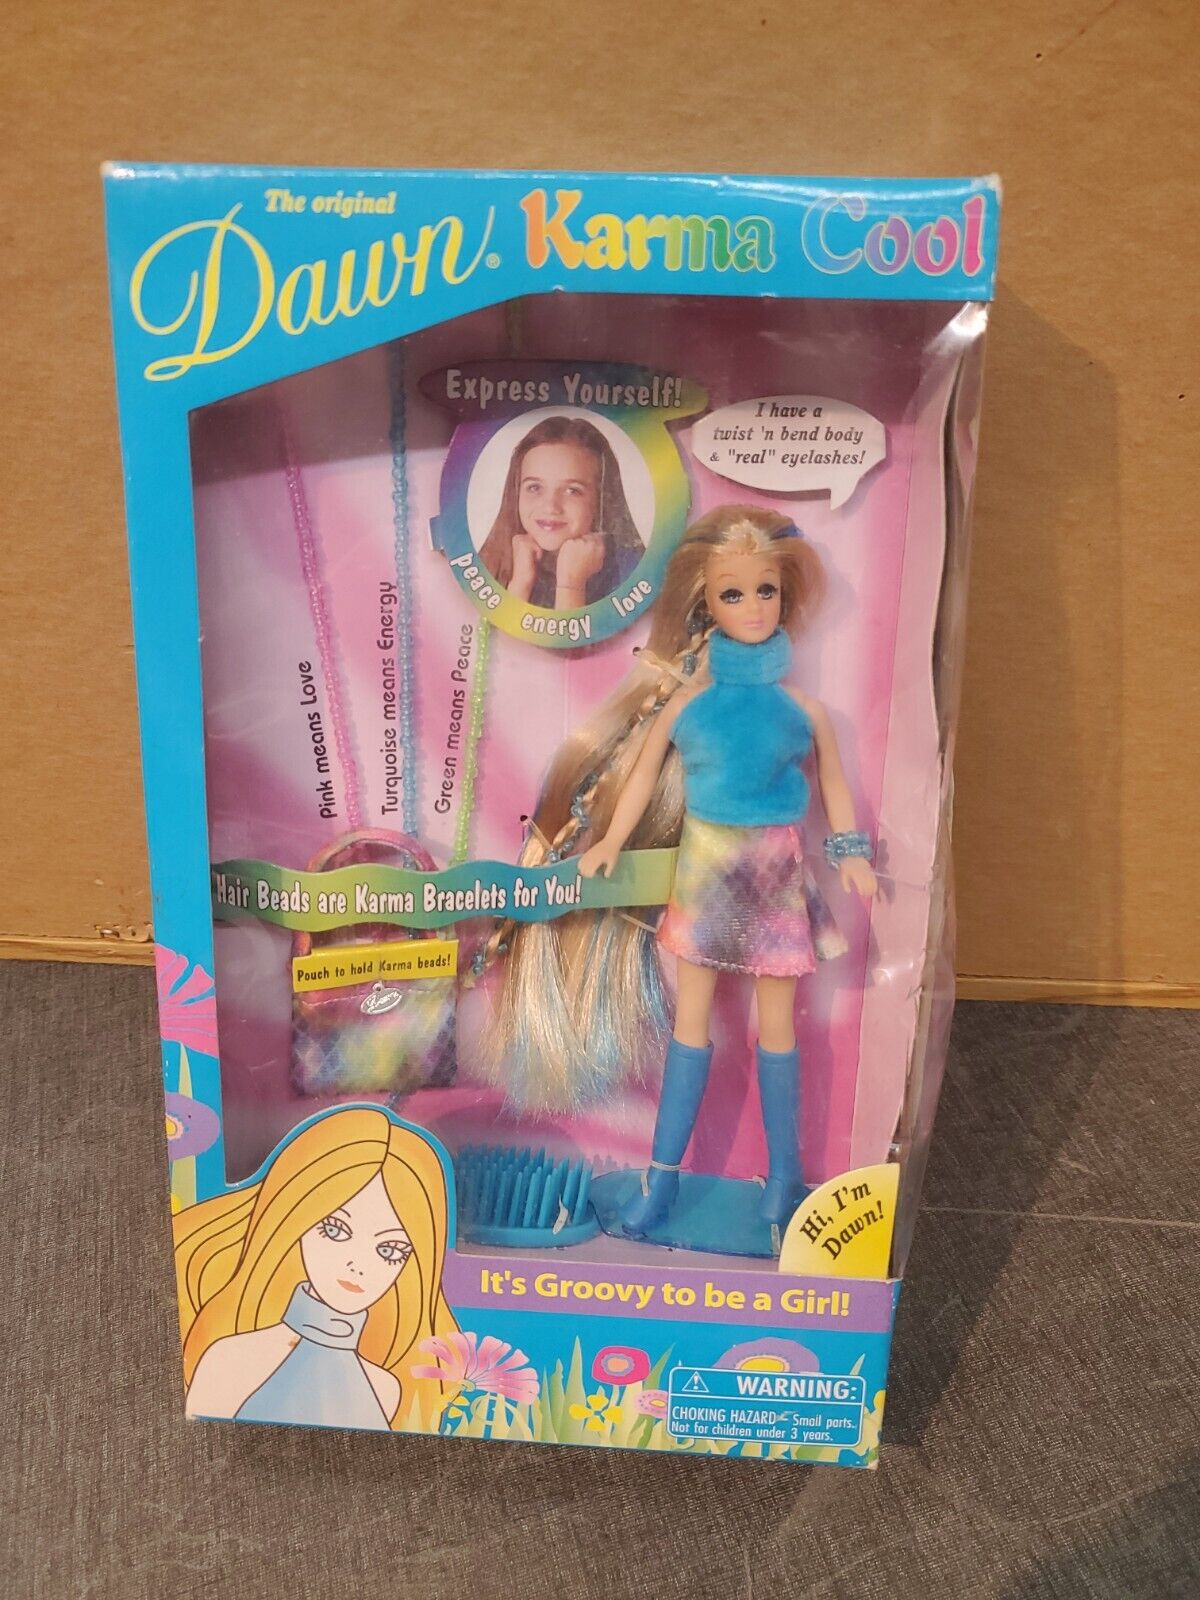 Original Dawn Karma Cool Doll 2002 by Checkerboard Toys Groovy To Be A Girl